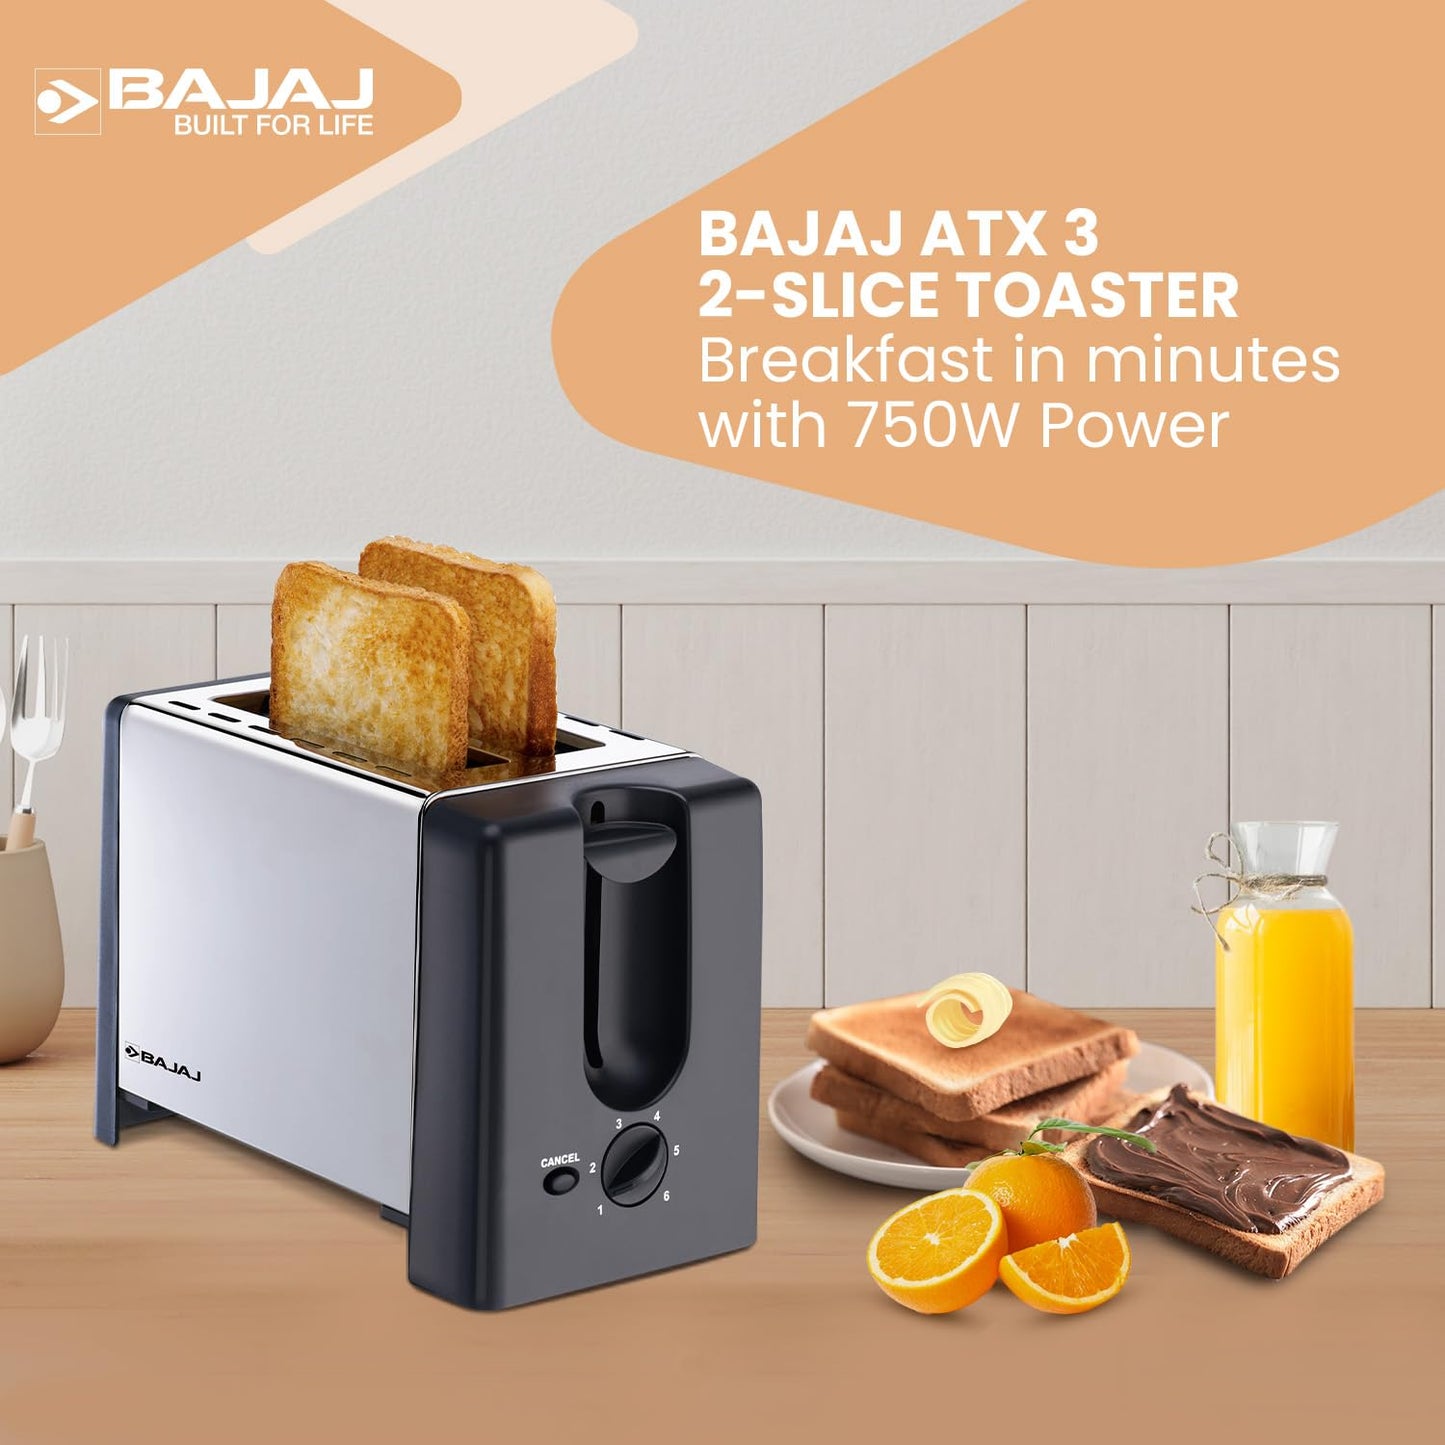 Bajaj ATX 3 750-Watt Pop-up Toaster | 2-Slice Automatic Pop up Toaster| Dust Cover & Slide Out Crumb Tray | 6-Level Browning Controls | Black/Silver Electric Toaster